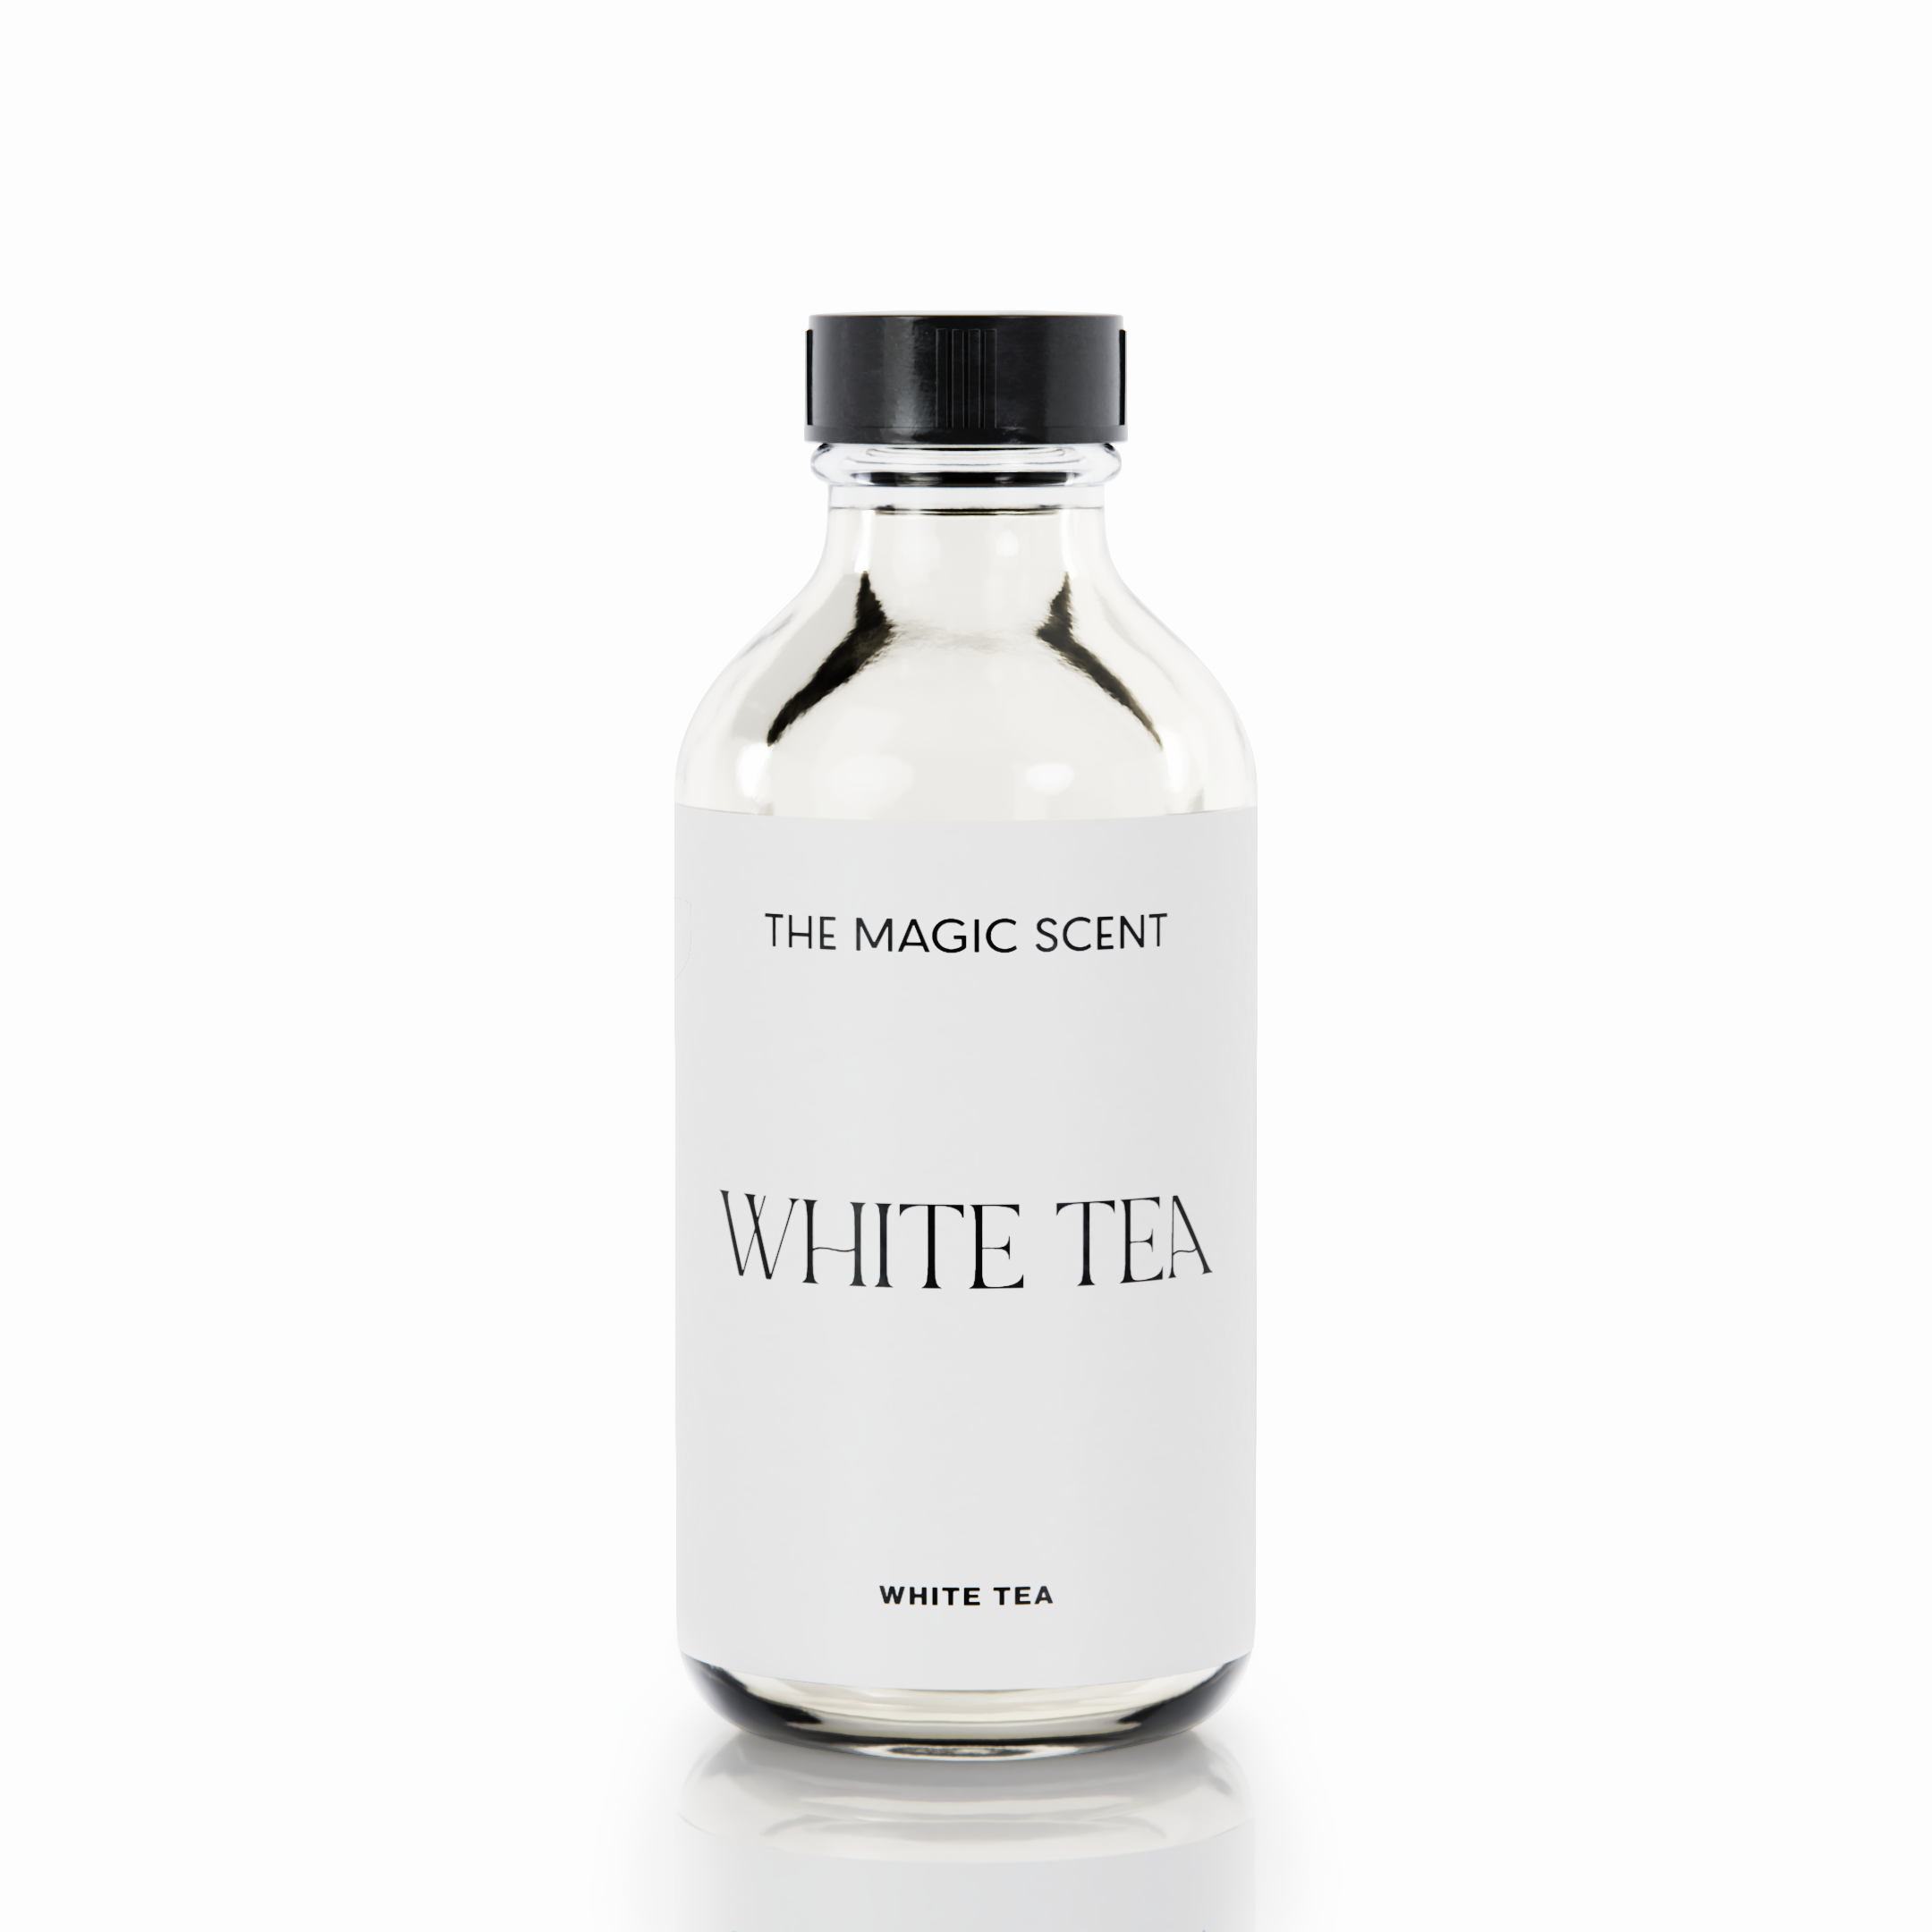 yethious White Tea Essential Oil White Tea Oil White Tea Aromatherapy Oil  White Tea Fragrance Oil for Diffuser, Baths, Soap, Candle Making Scent Oil